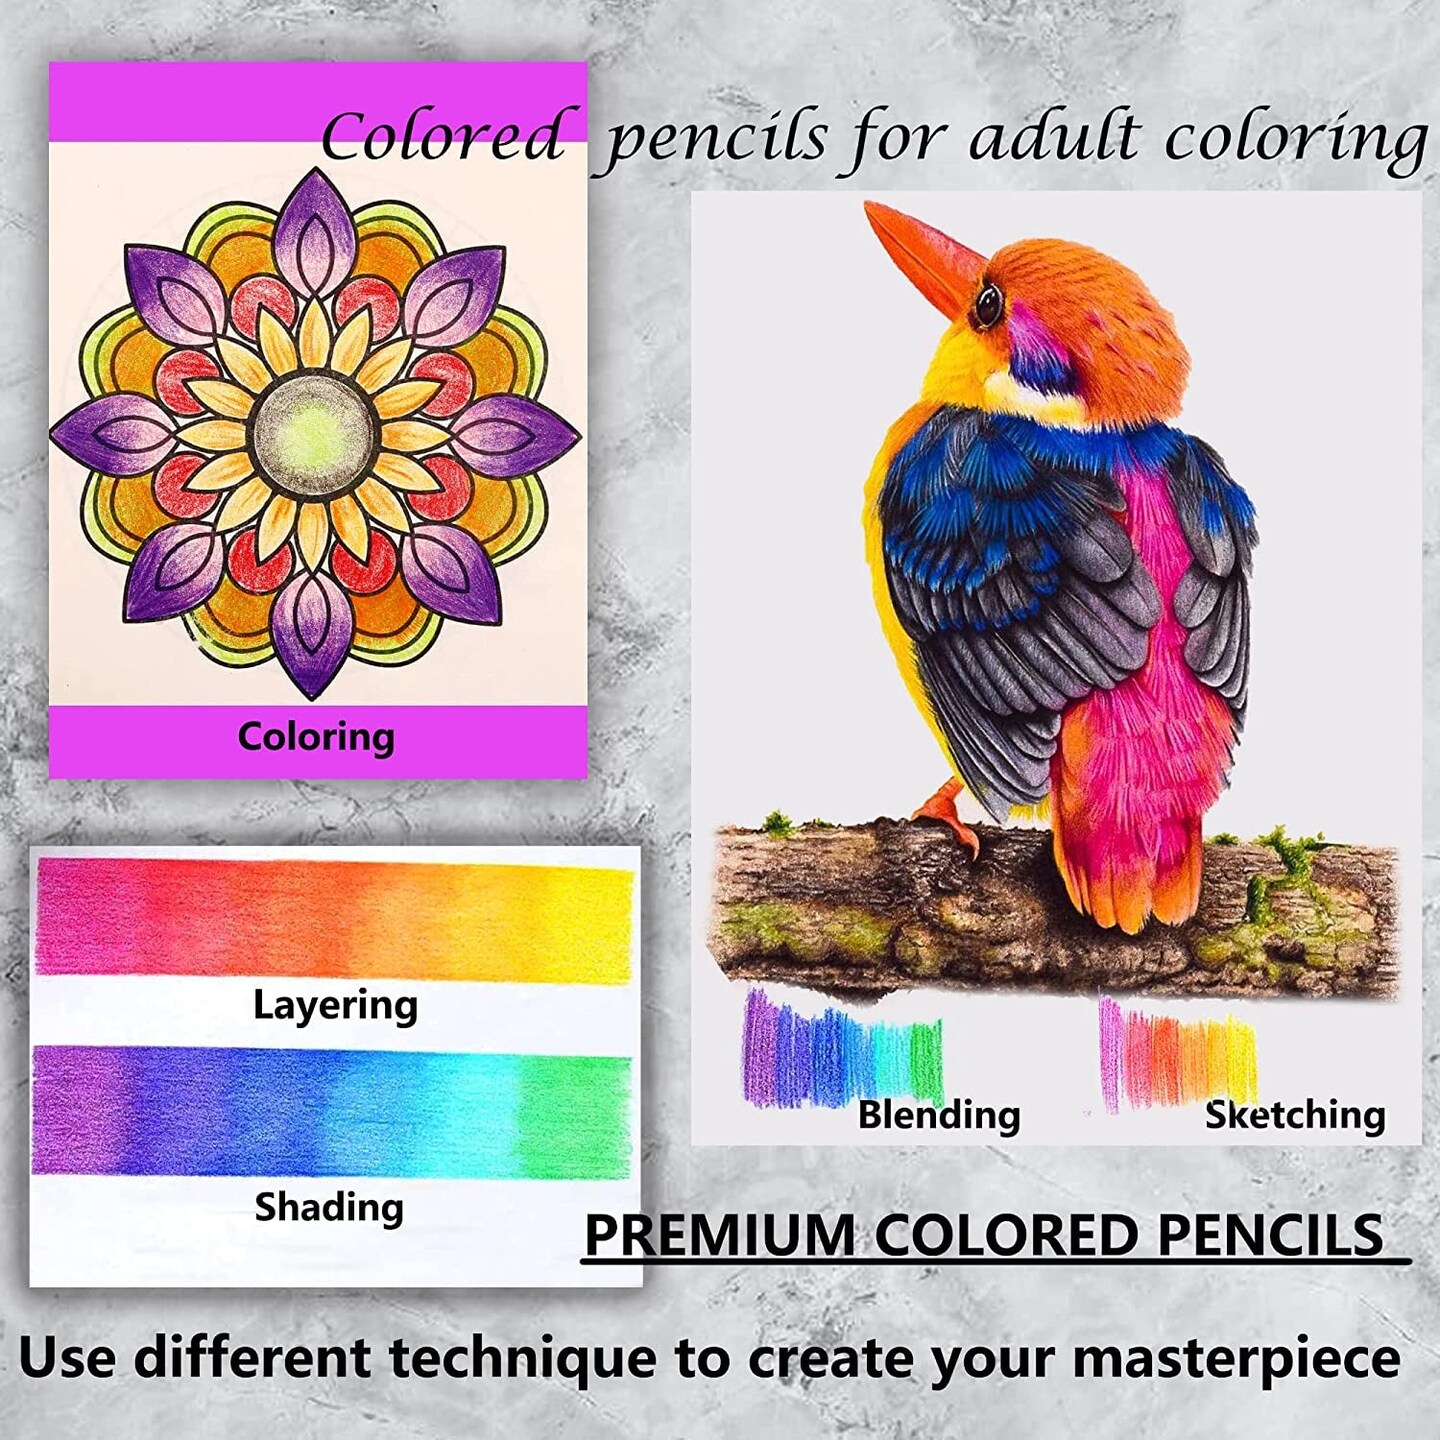 Premium Colored Pencils,Set of 120 Colors,Artists Soft Core with Vibrant  Color,Ideal for Drawing Sketching Shading,Coloring Pencils for Adults  Beginners Kids